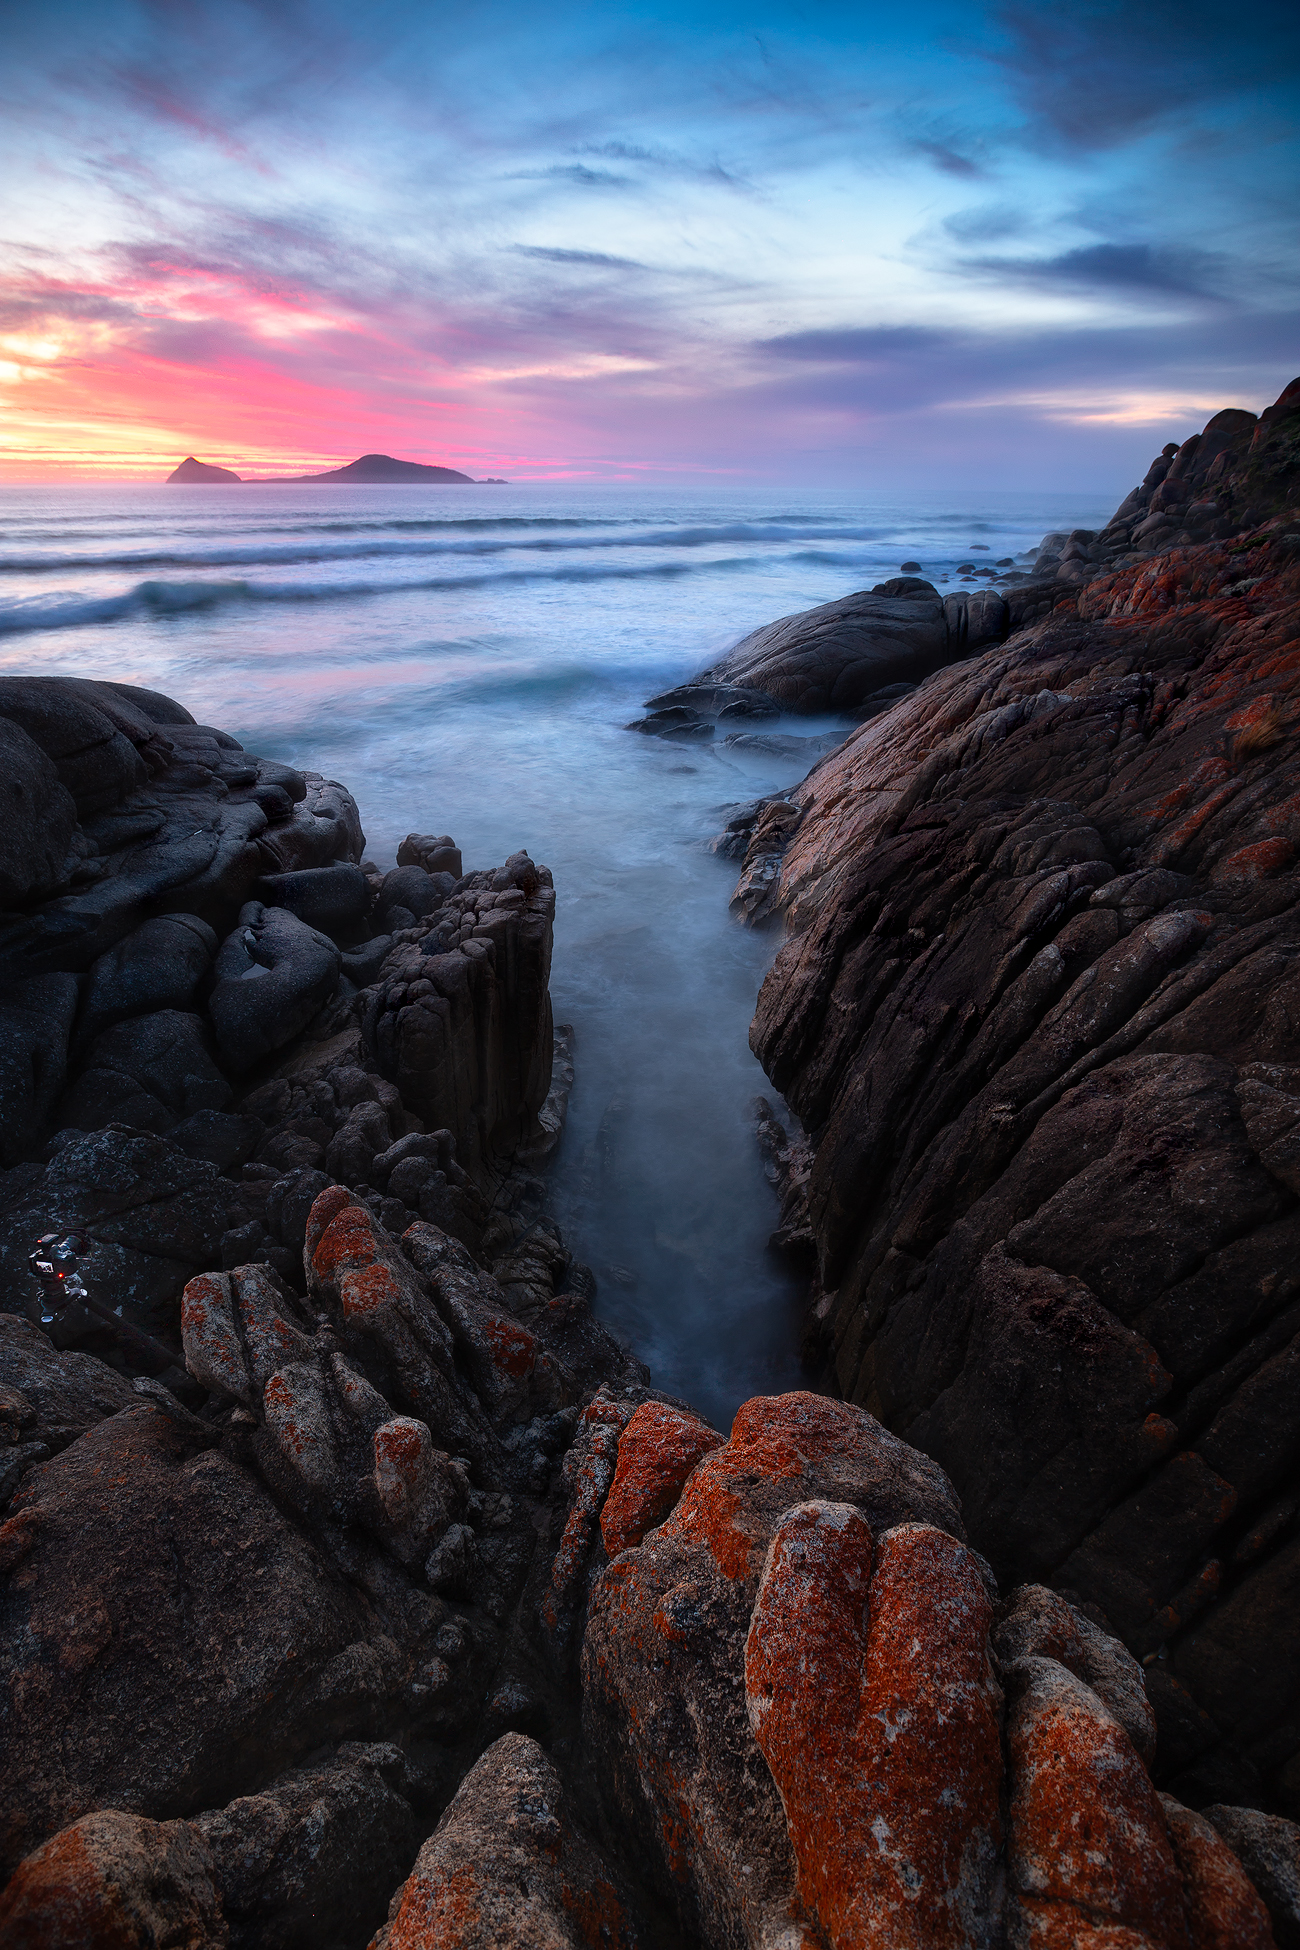 Whisky Bay - Wilsons Promontory | Landscape Photography Masterclass | We Are Raw Photography Tours